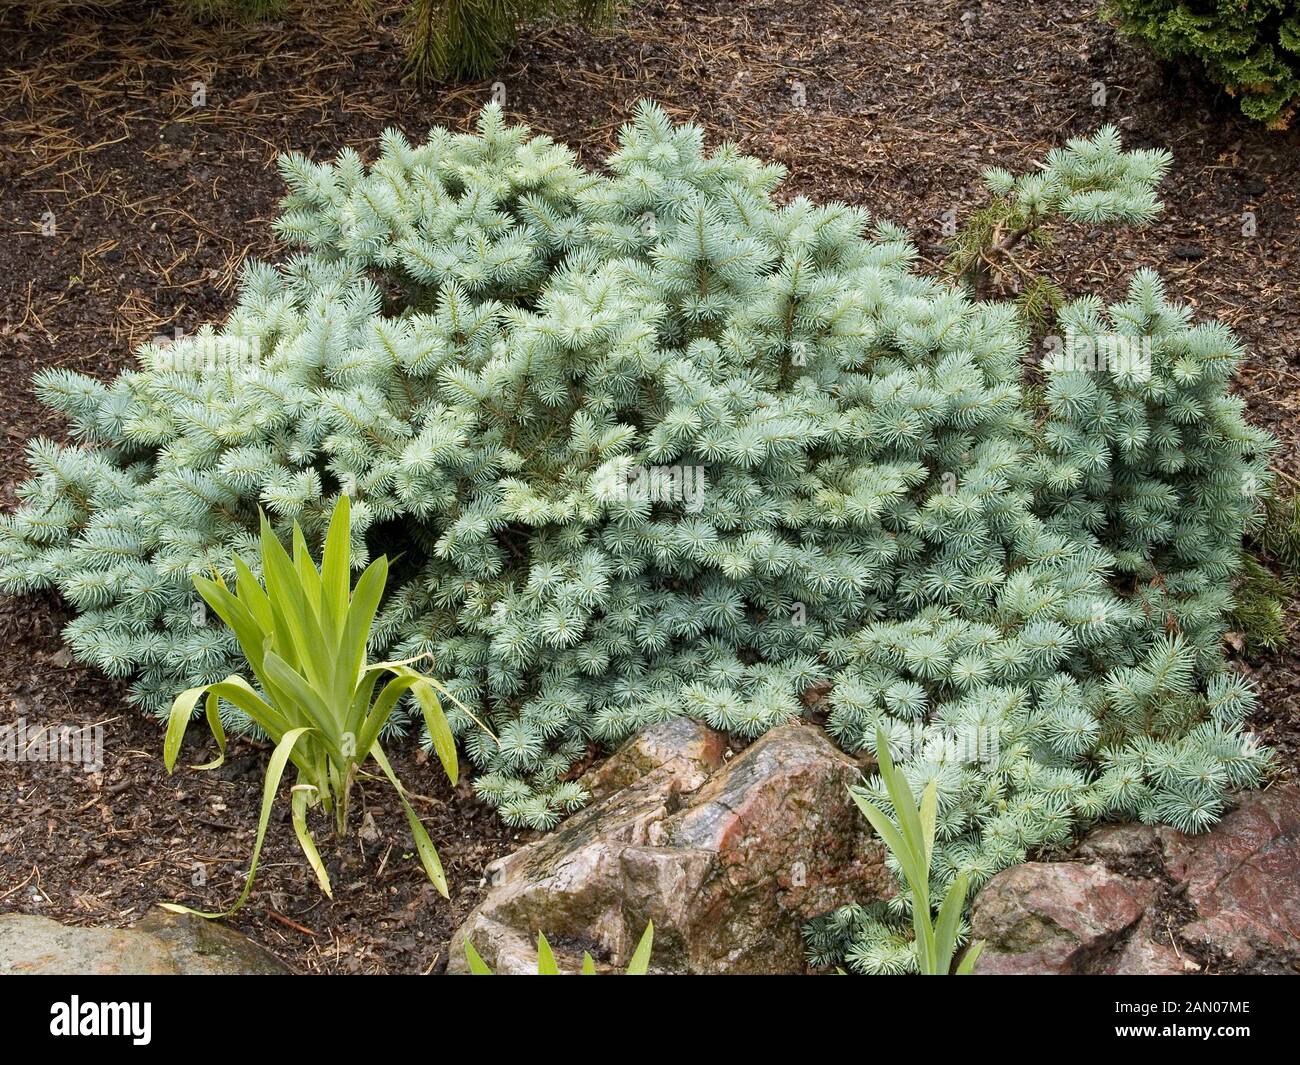 PICEA PUNGENS 'ST. MARY'S BROOM' Stock Photo